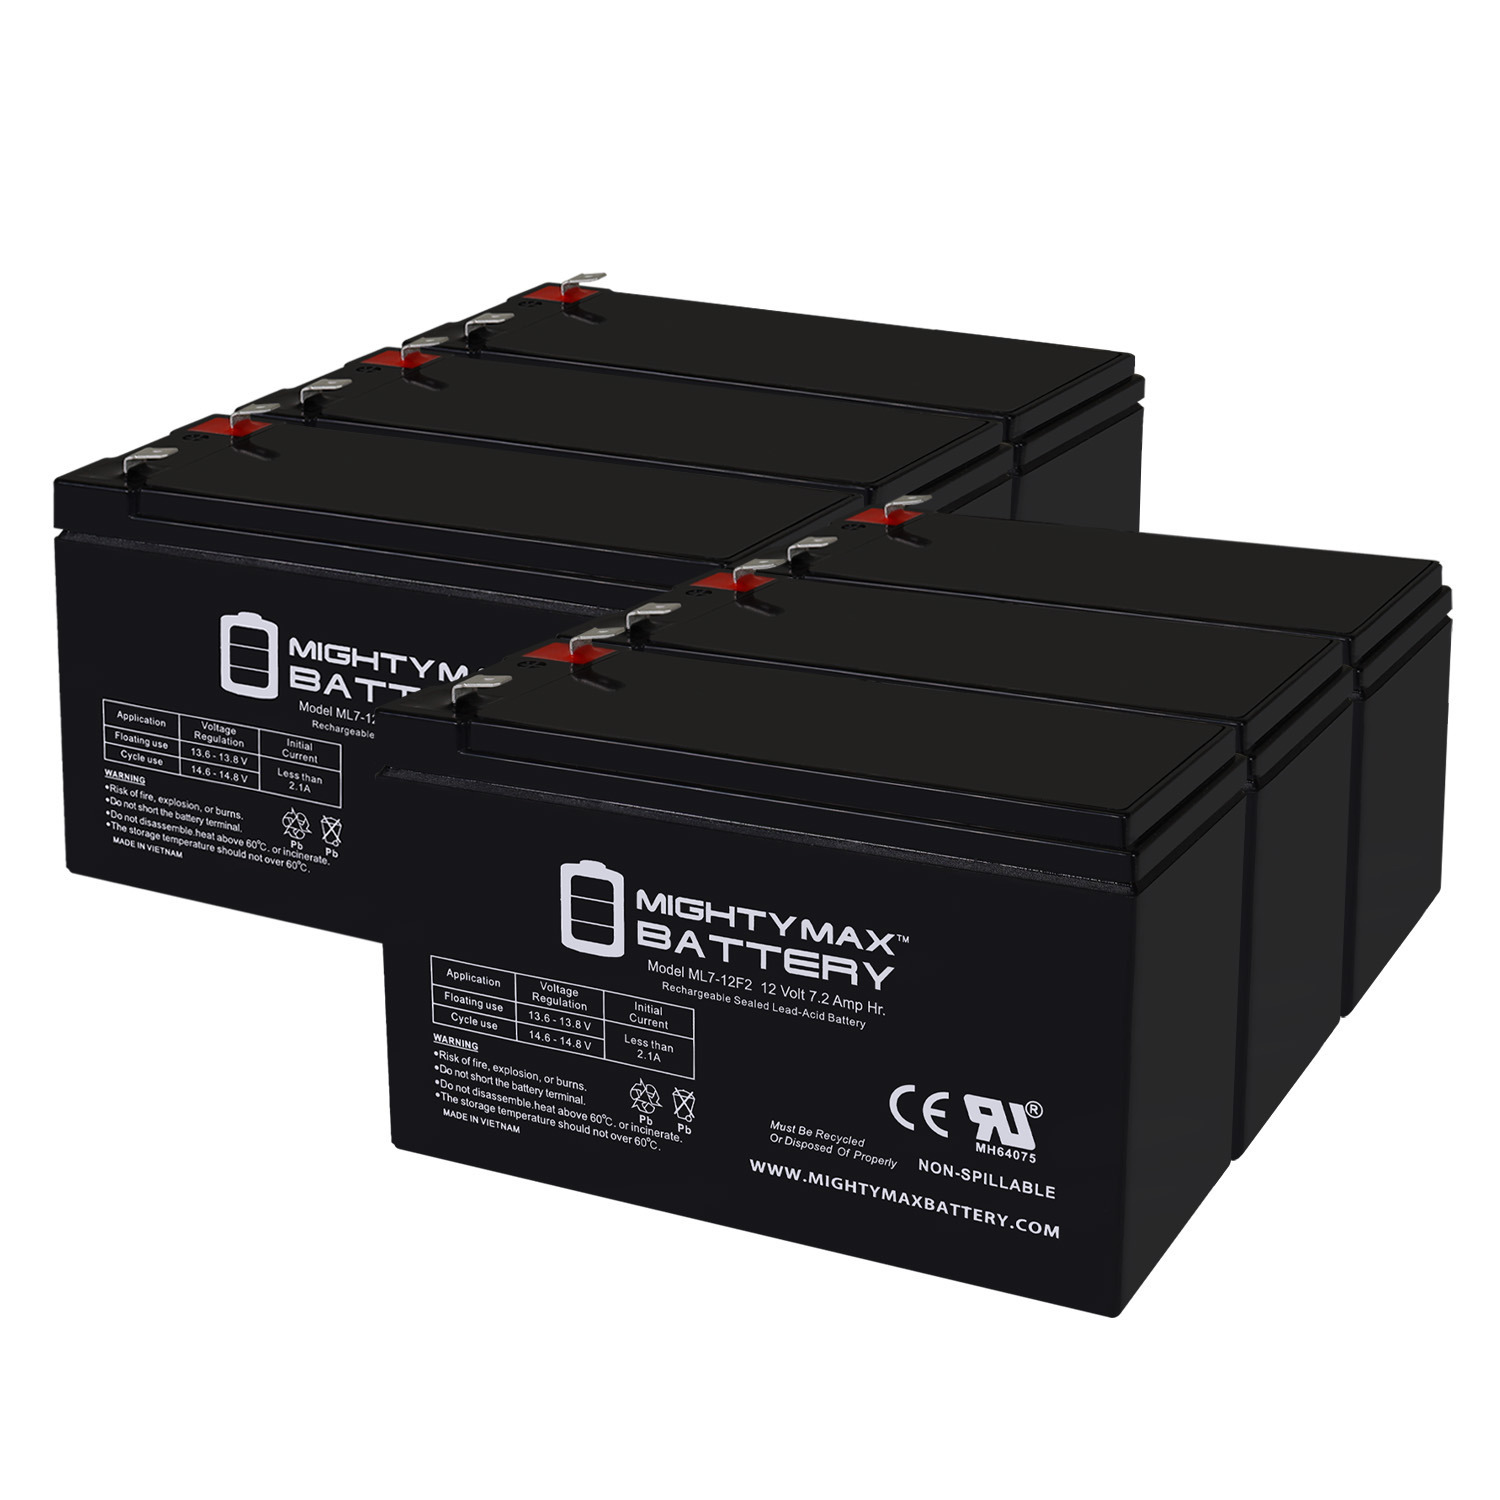 12V 7Ah F2 Replacement Battery for Eaton Powerware PW3115-300i - 6 Pack